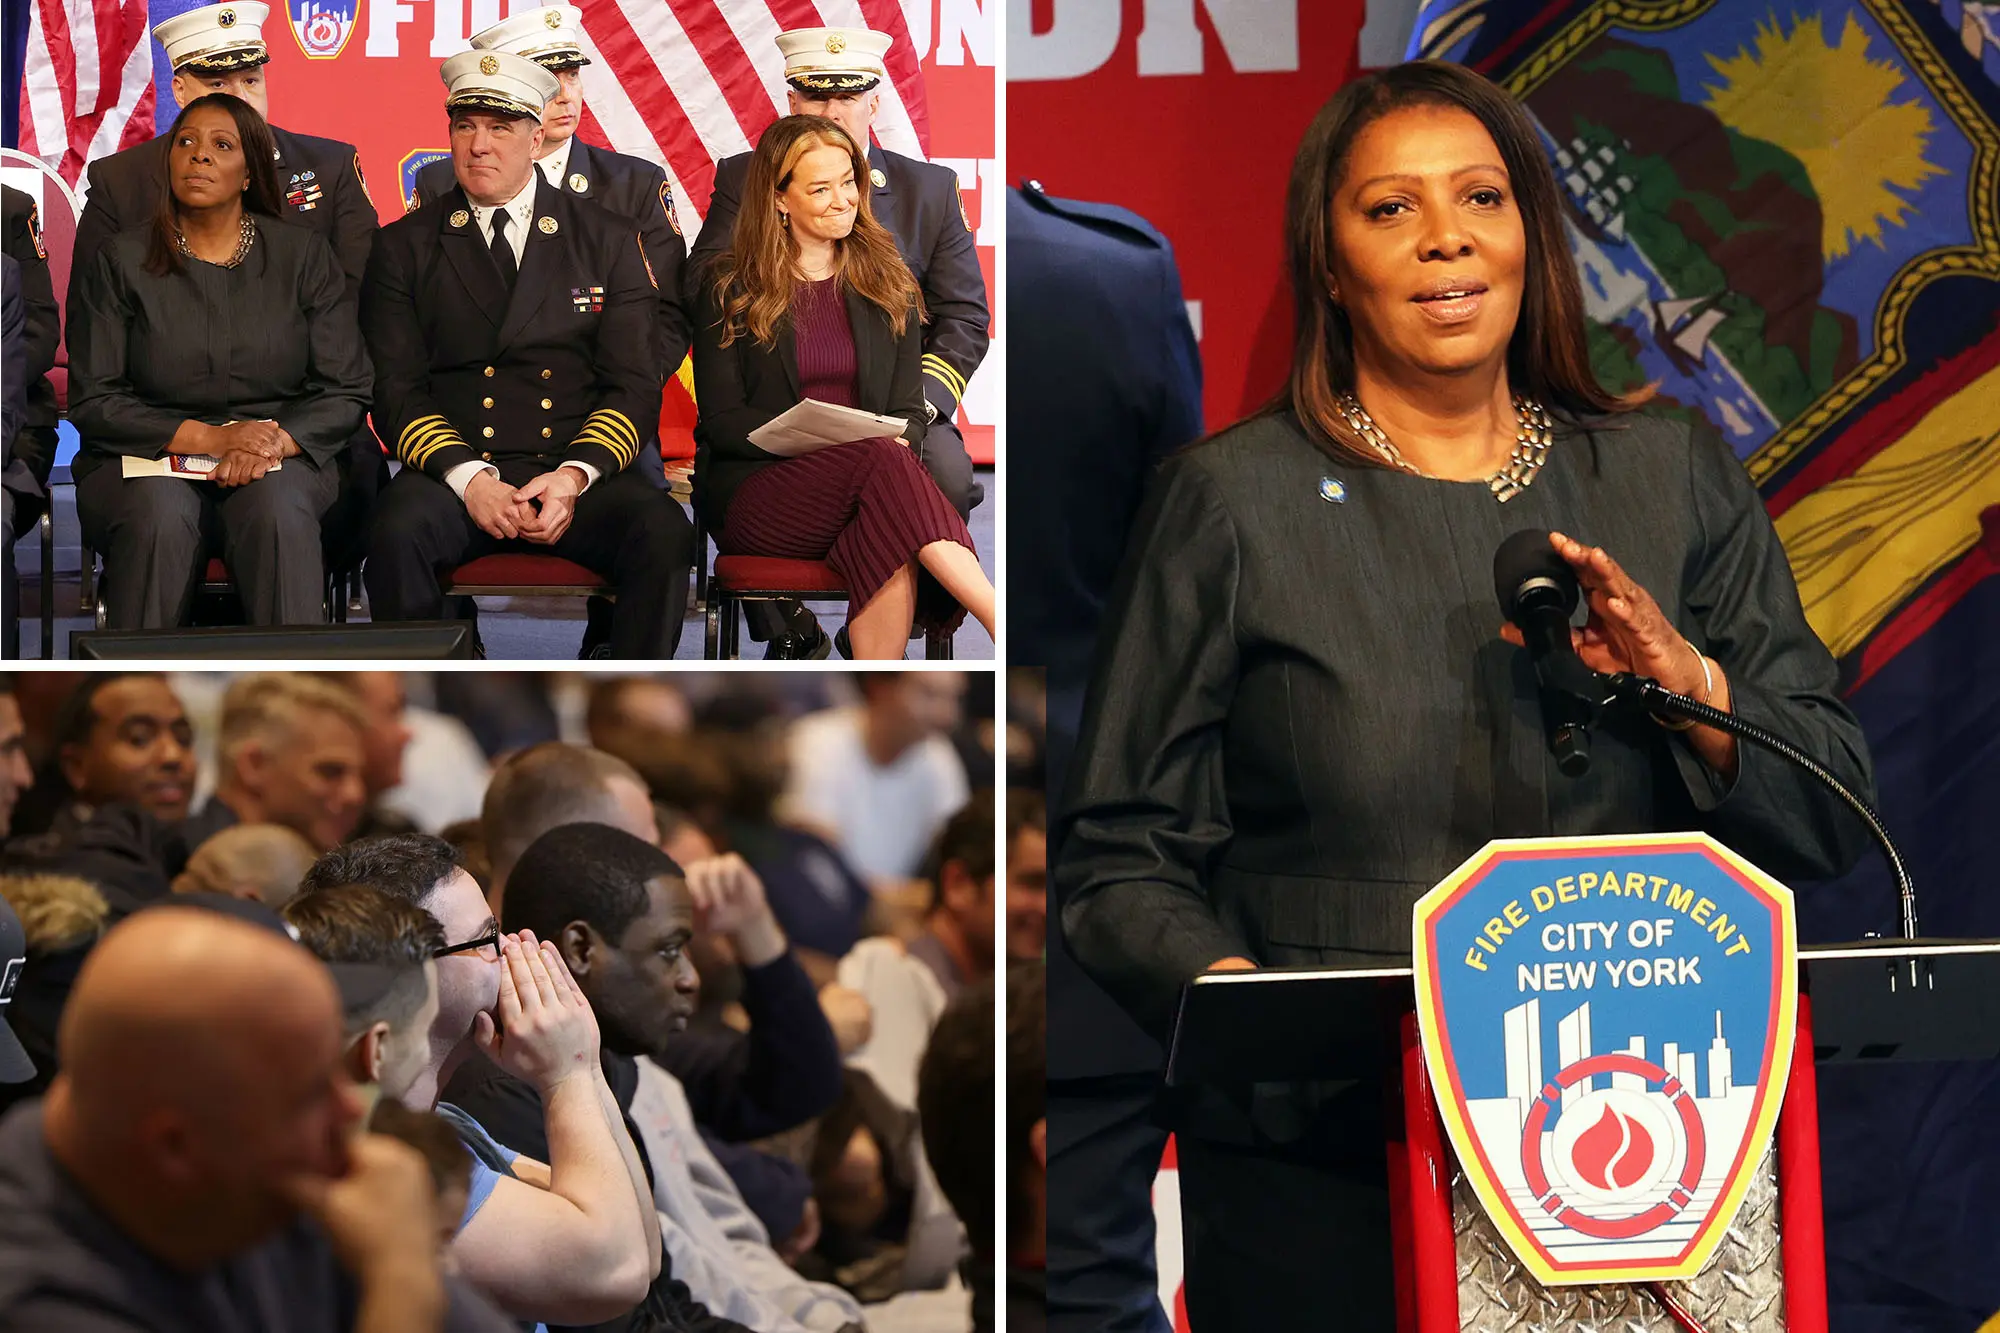 New York Firefighters Who Booed Letitia James To Be Sent To HQ To Be Punished, “Educated” About “Unacceptable” Behavior